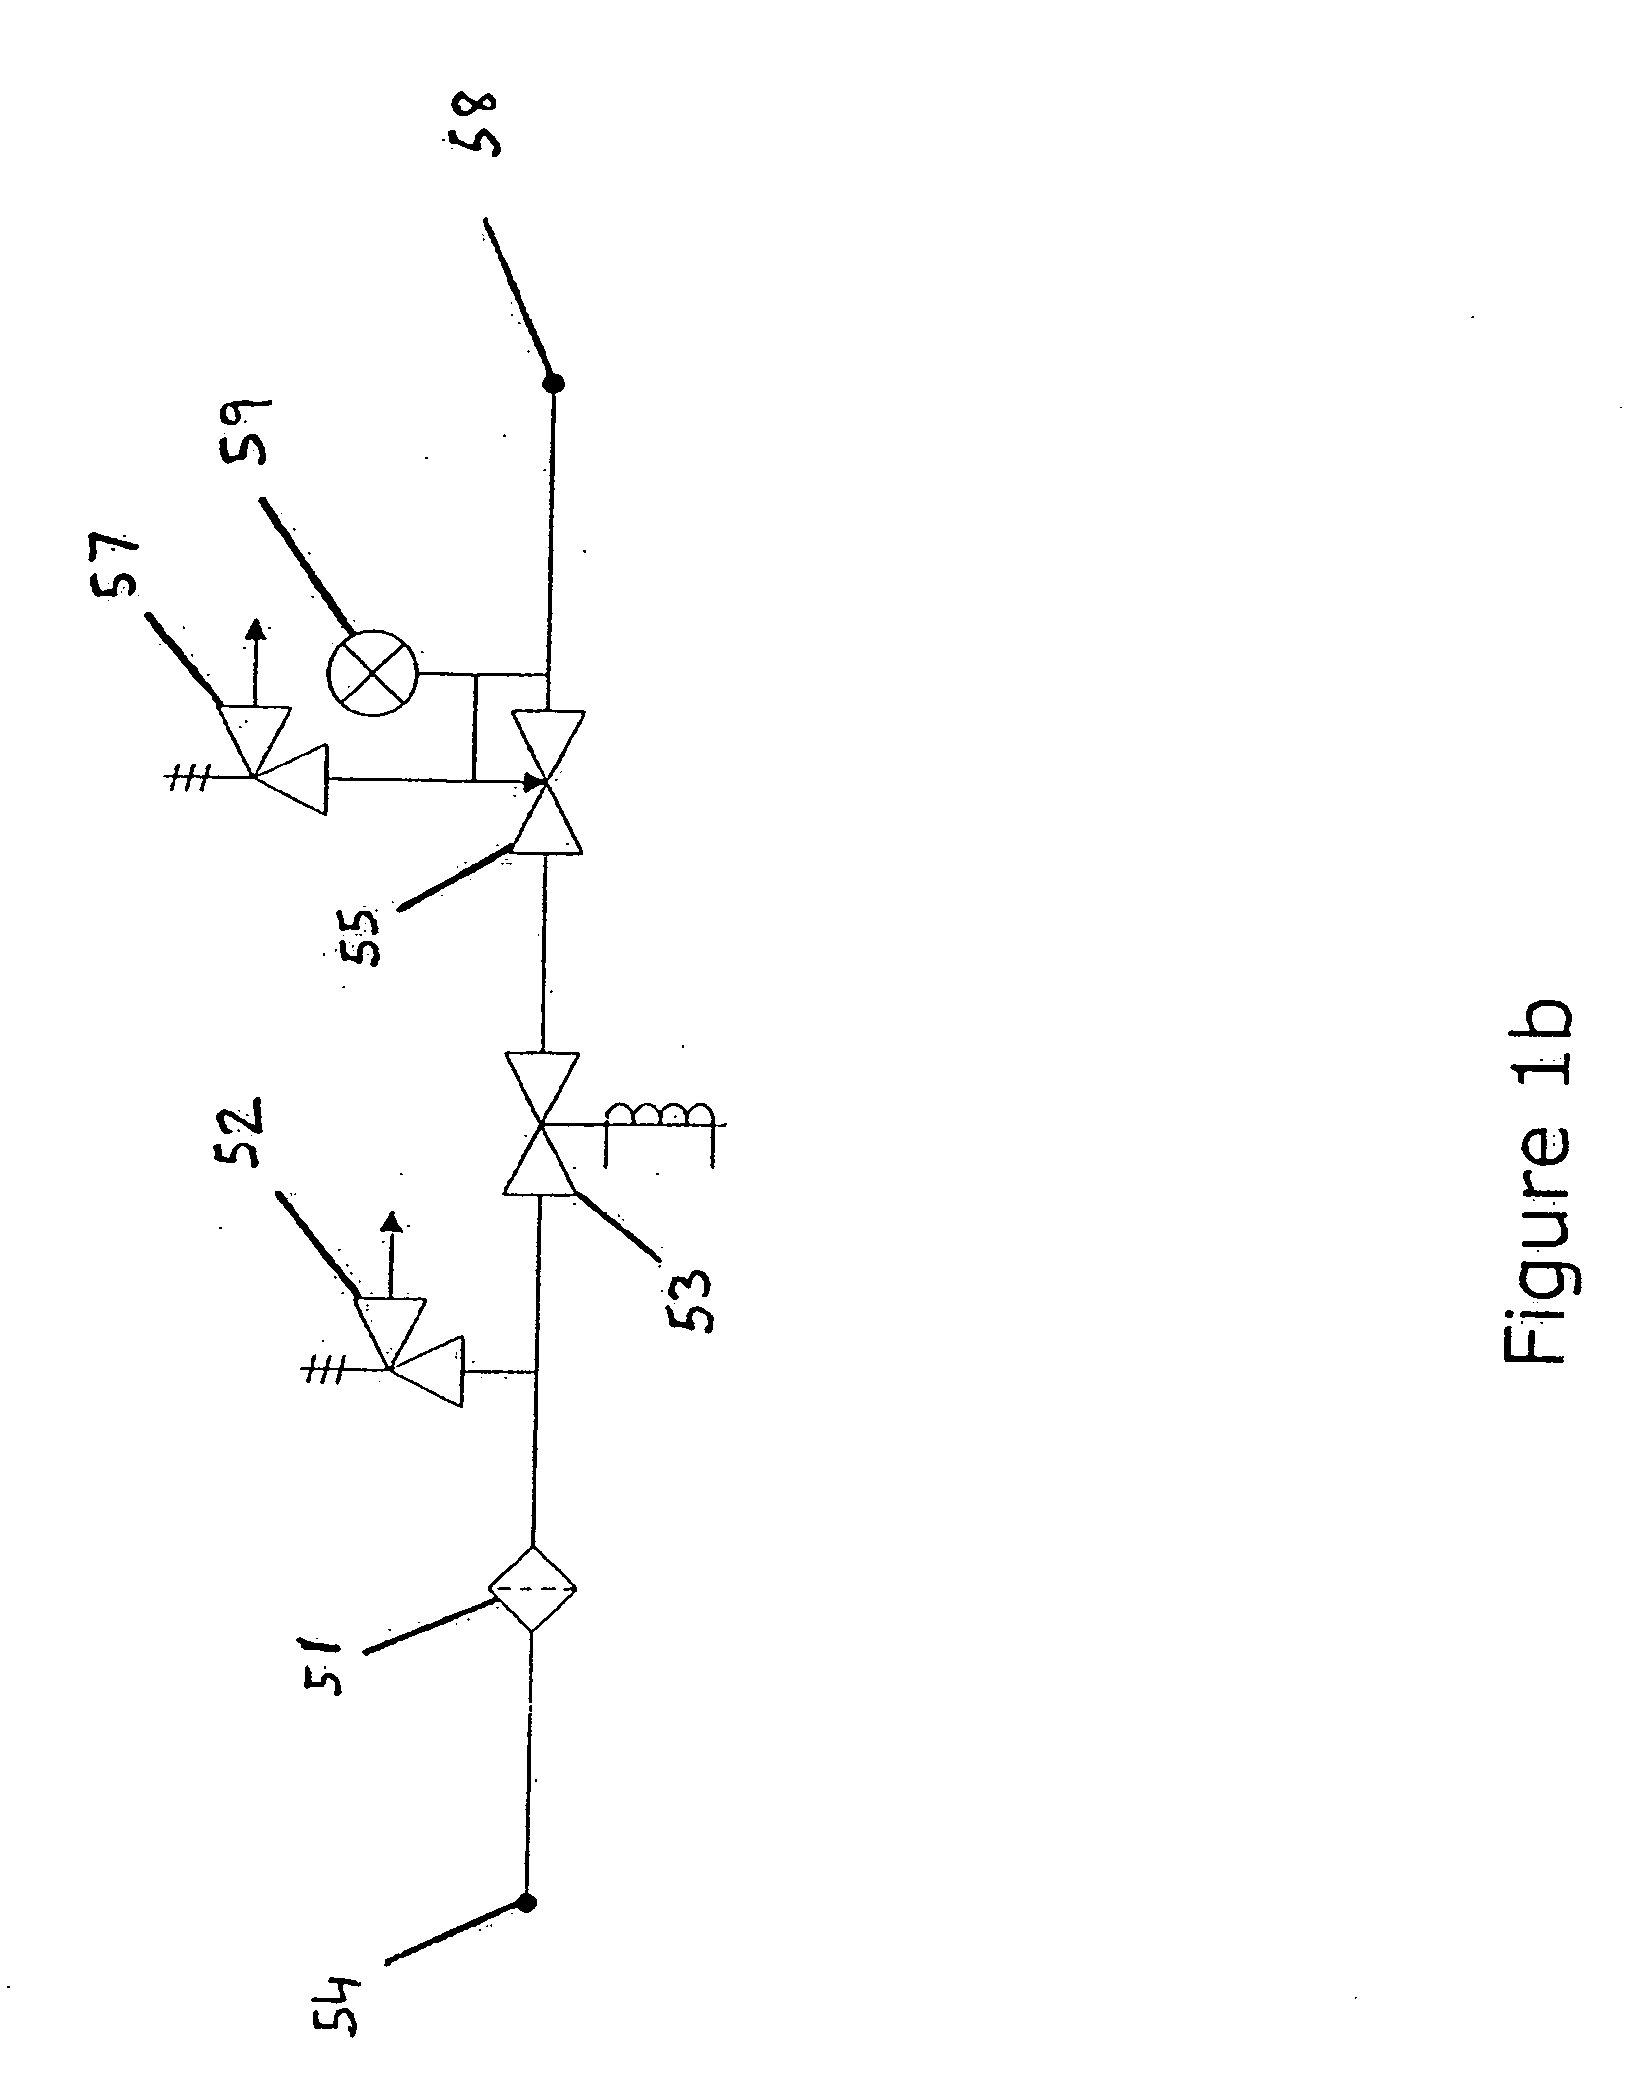 Fuel cell electric power generating system